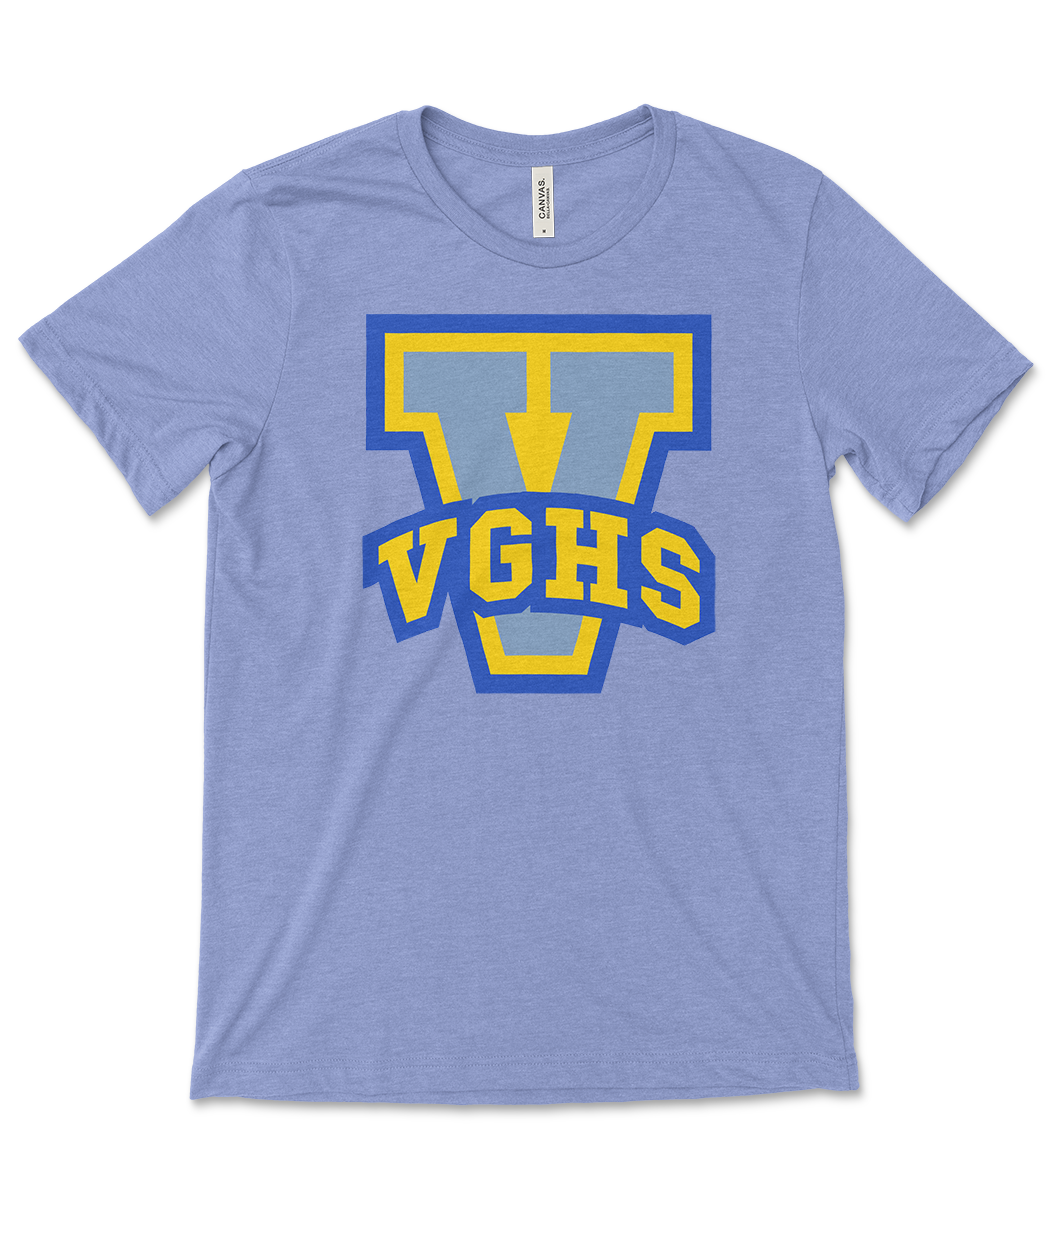 Heathered blue short sleeve shirts with large V printed on them in yellow and blue. VGHS is written in block varsity letters across the bottom of the V.